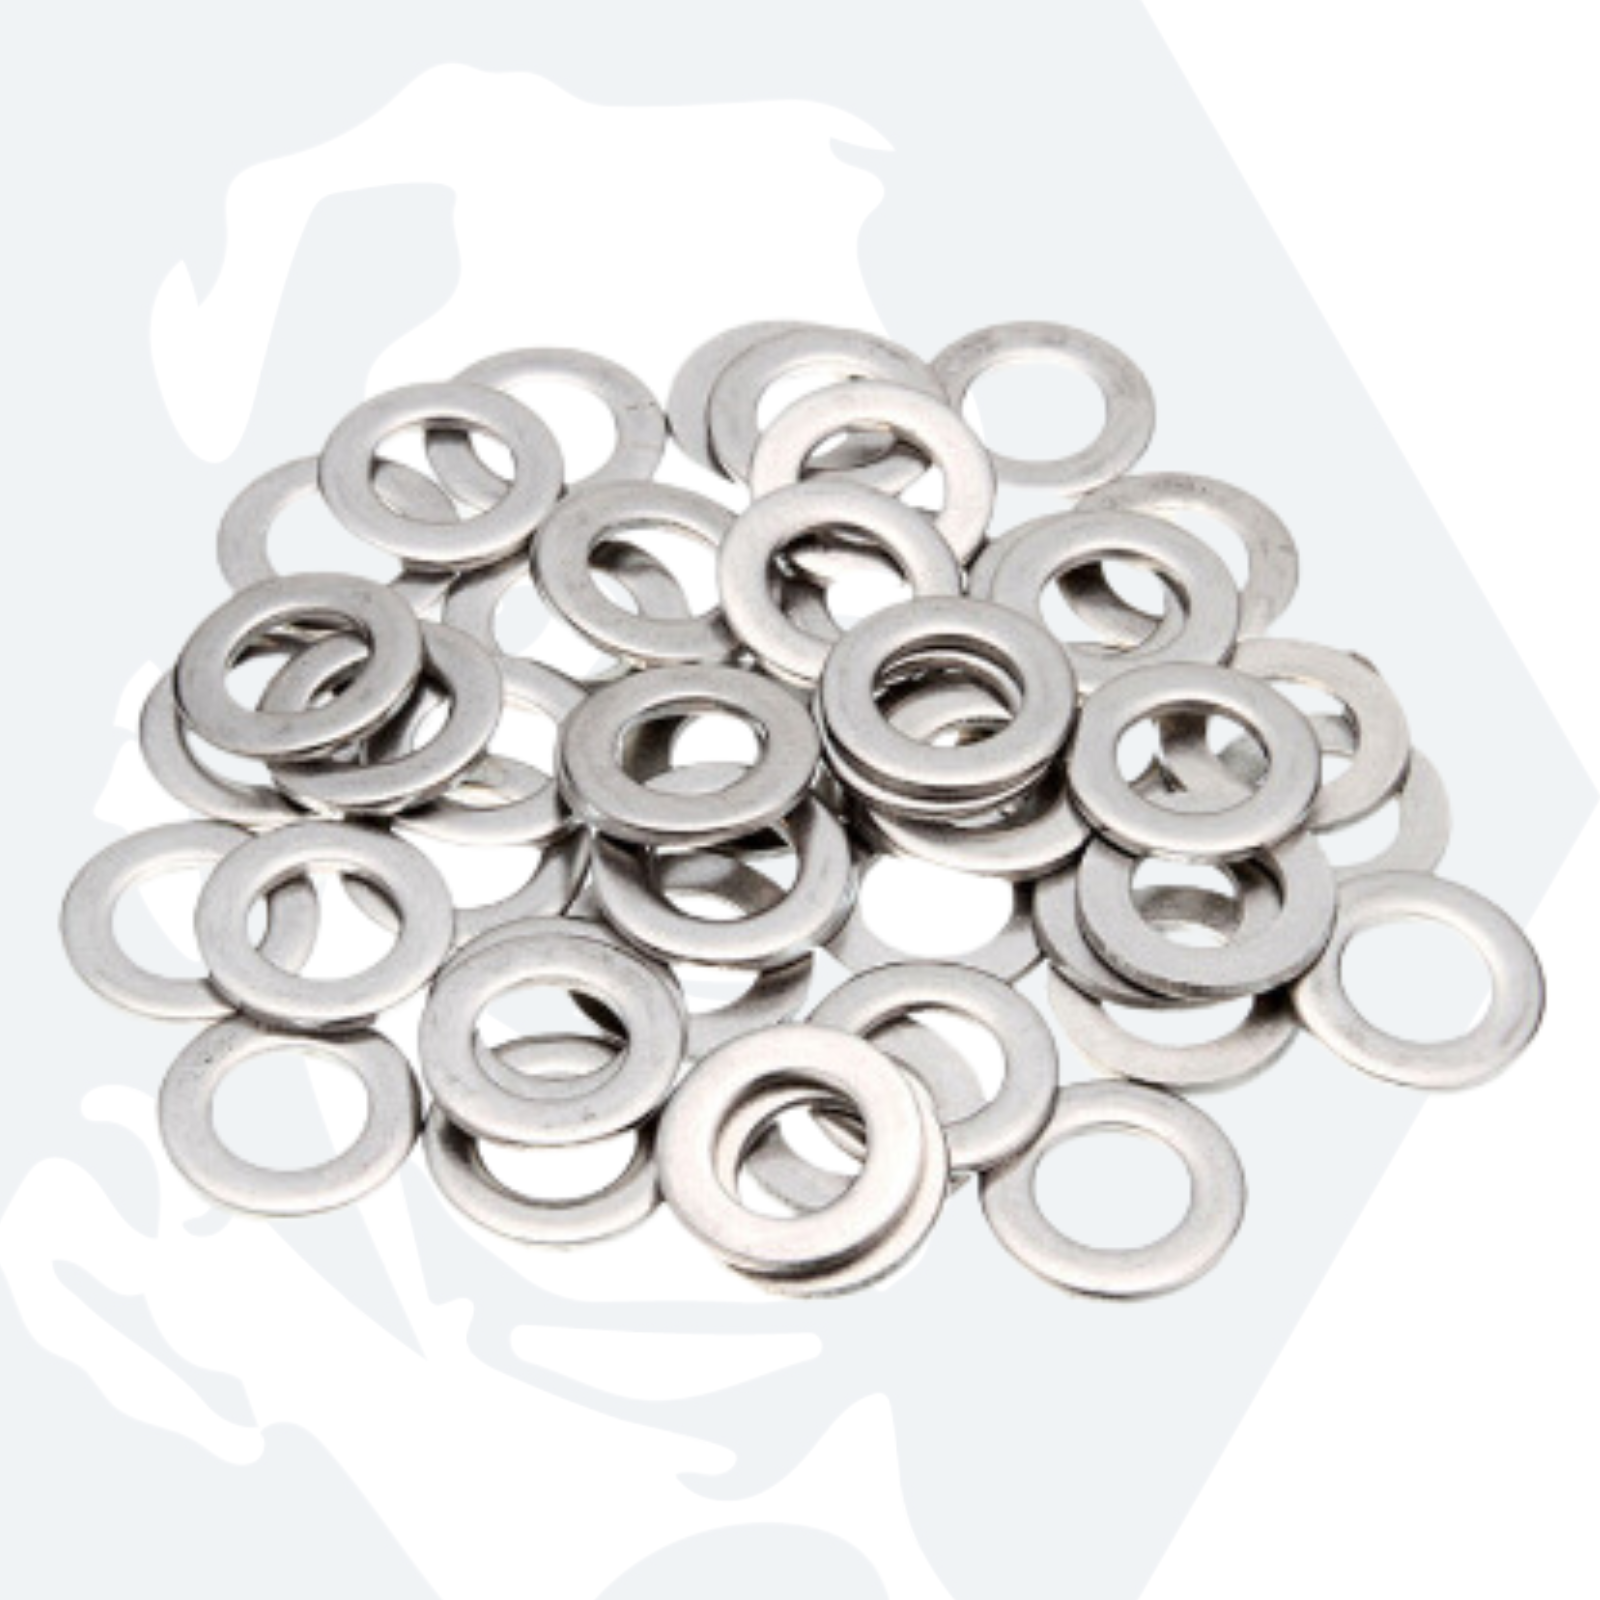 M2 Form A Flat Washers (DIN 125) - Stainless Steel (A2)